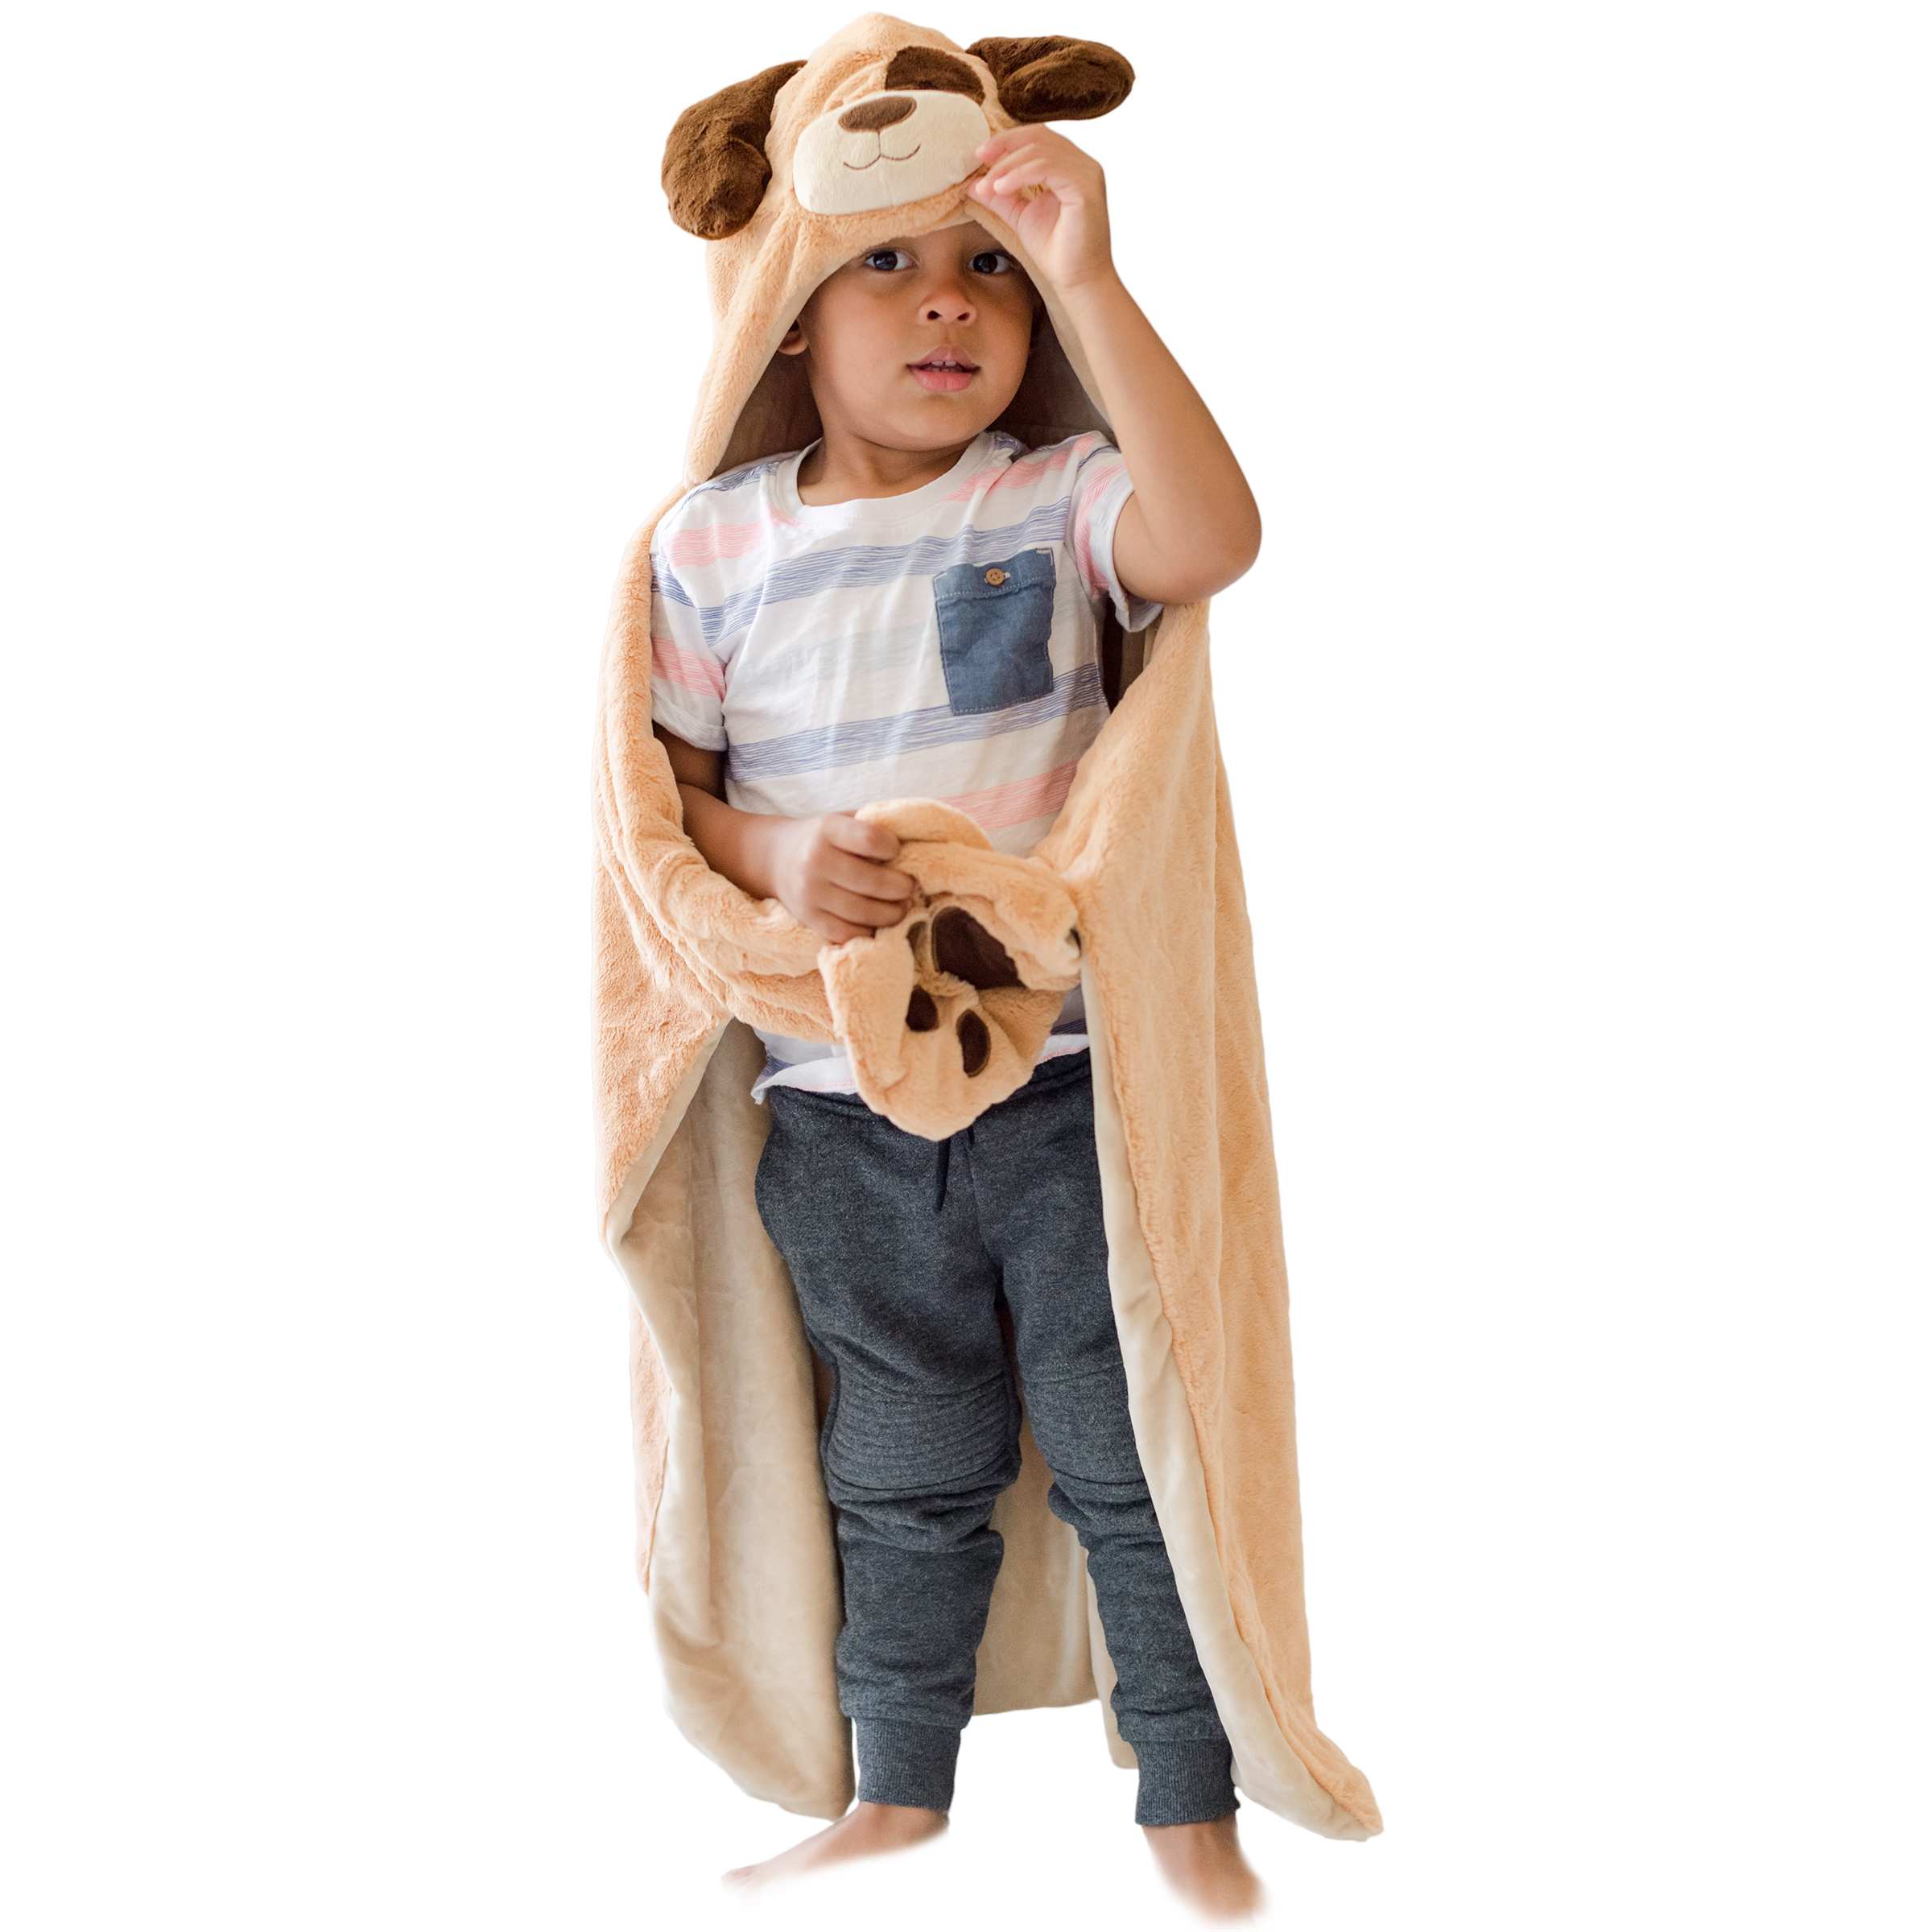 Animal Adventure Wild for Style™ 2-in-1 Transformable Cape 10" Dog Plush Toy - image 1 of 8